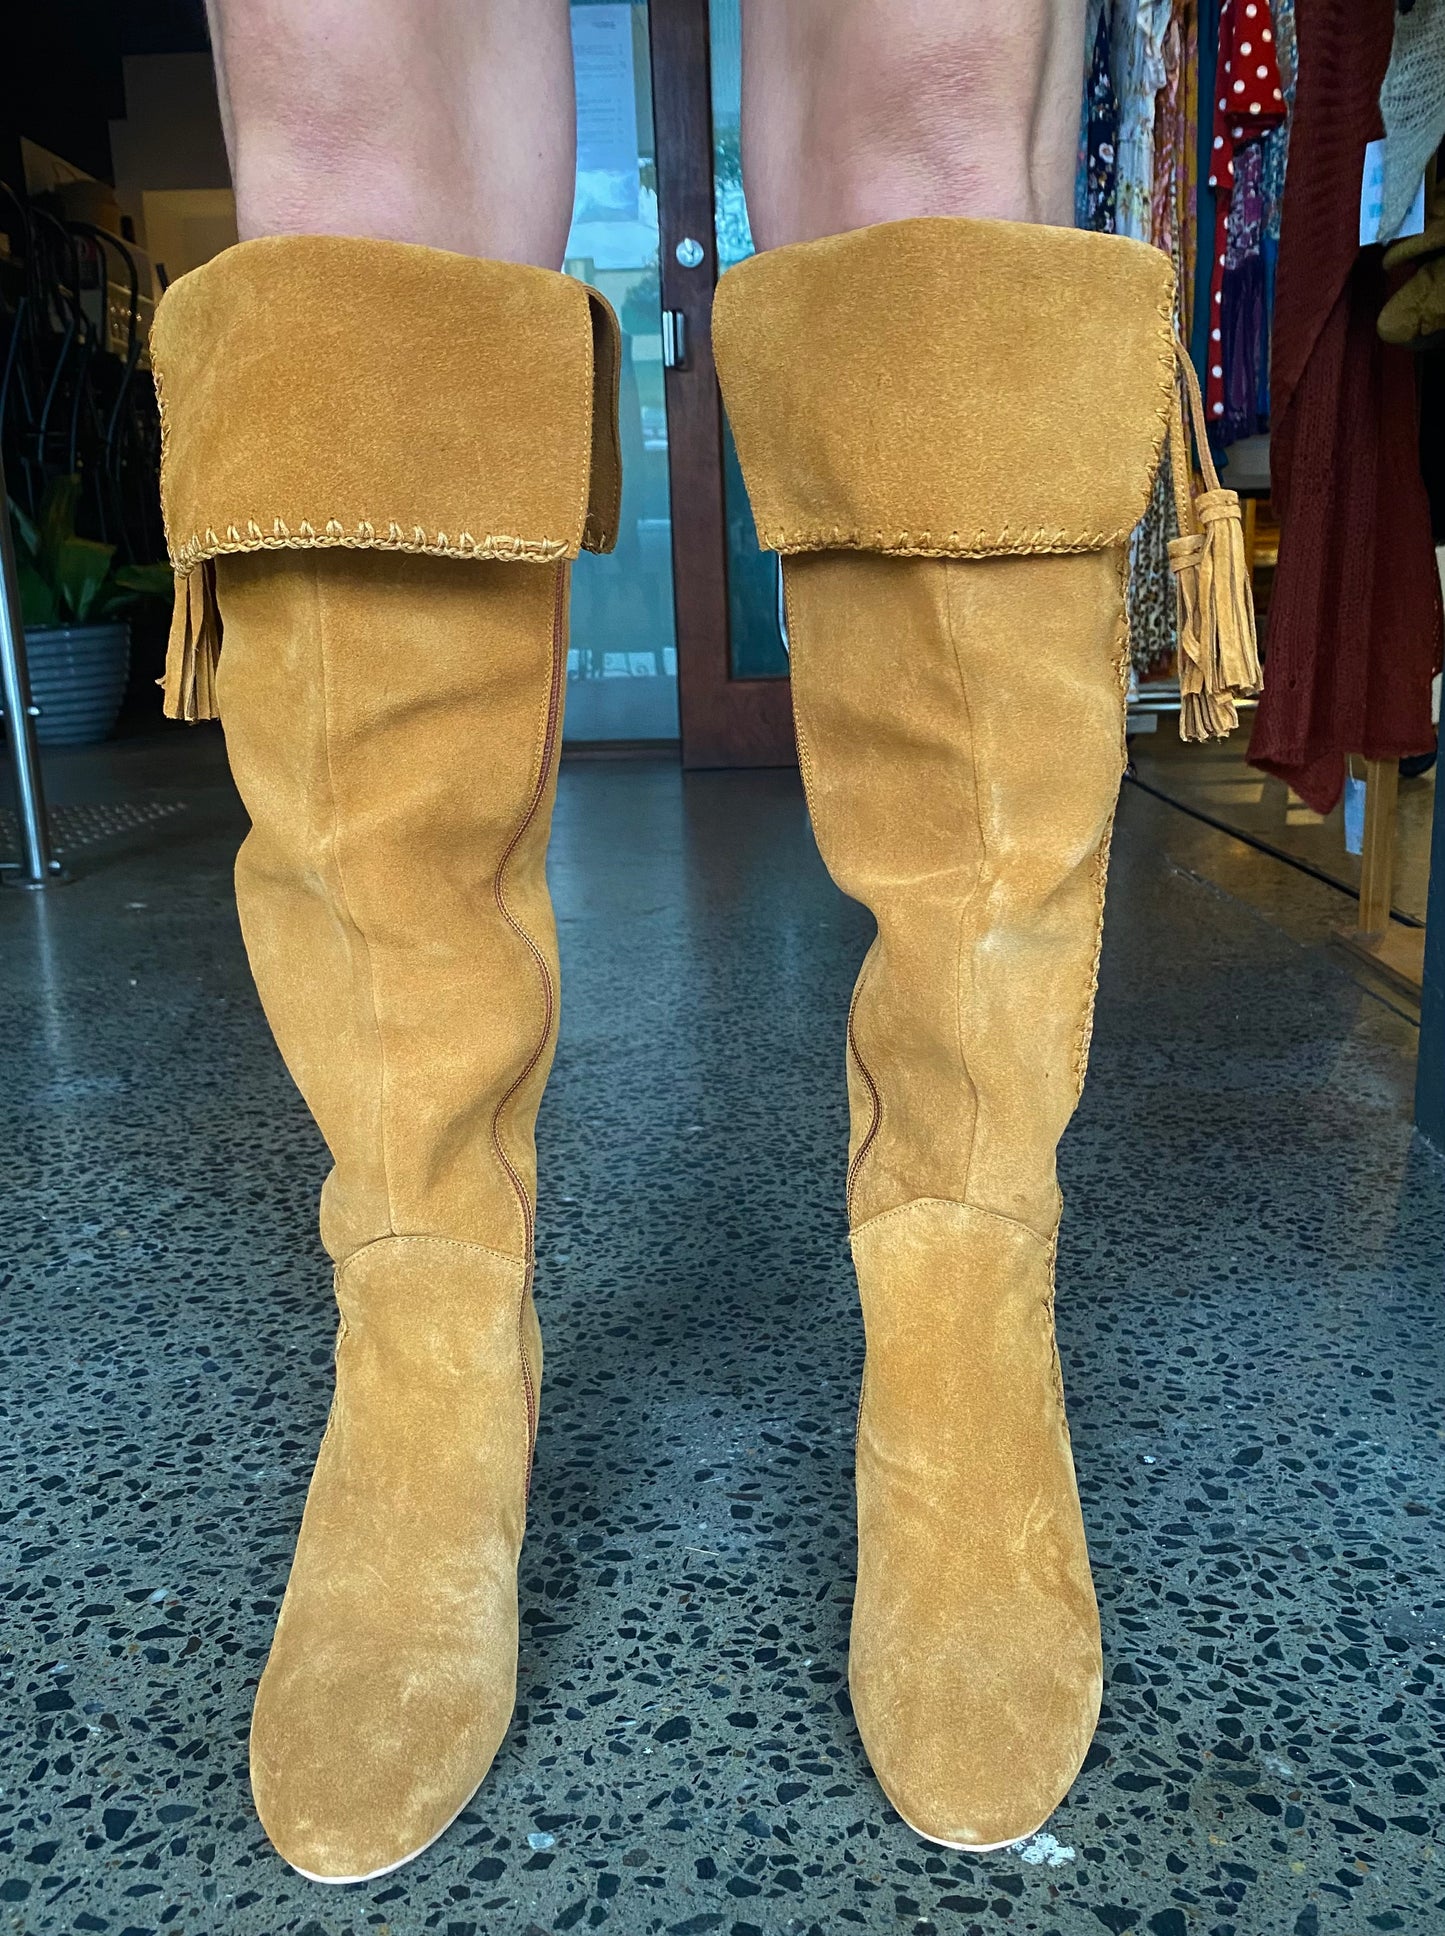 Mail Tan Suede Boots